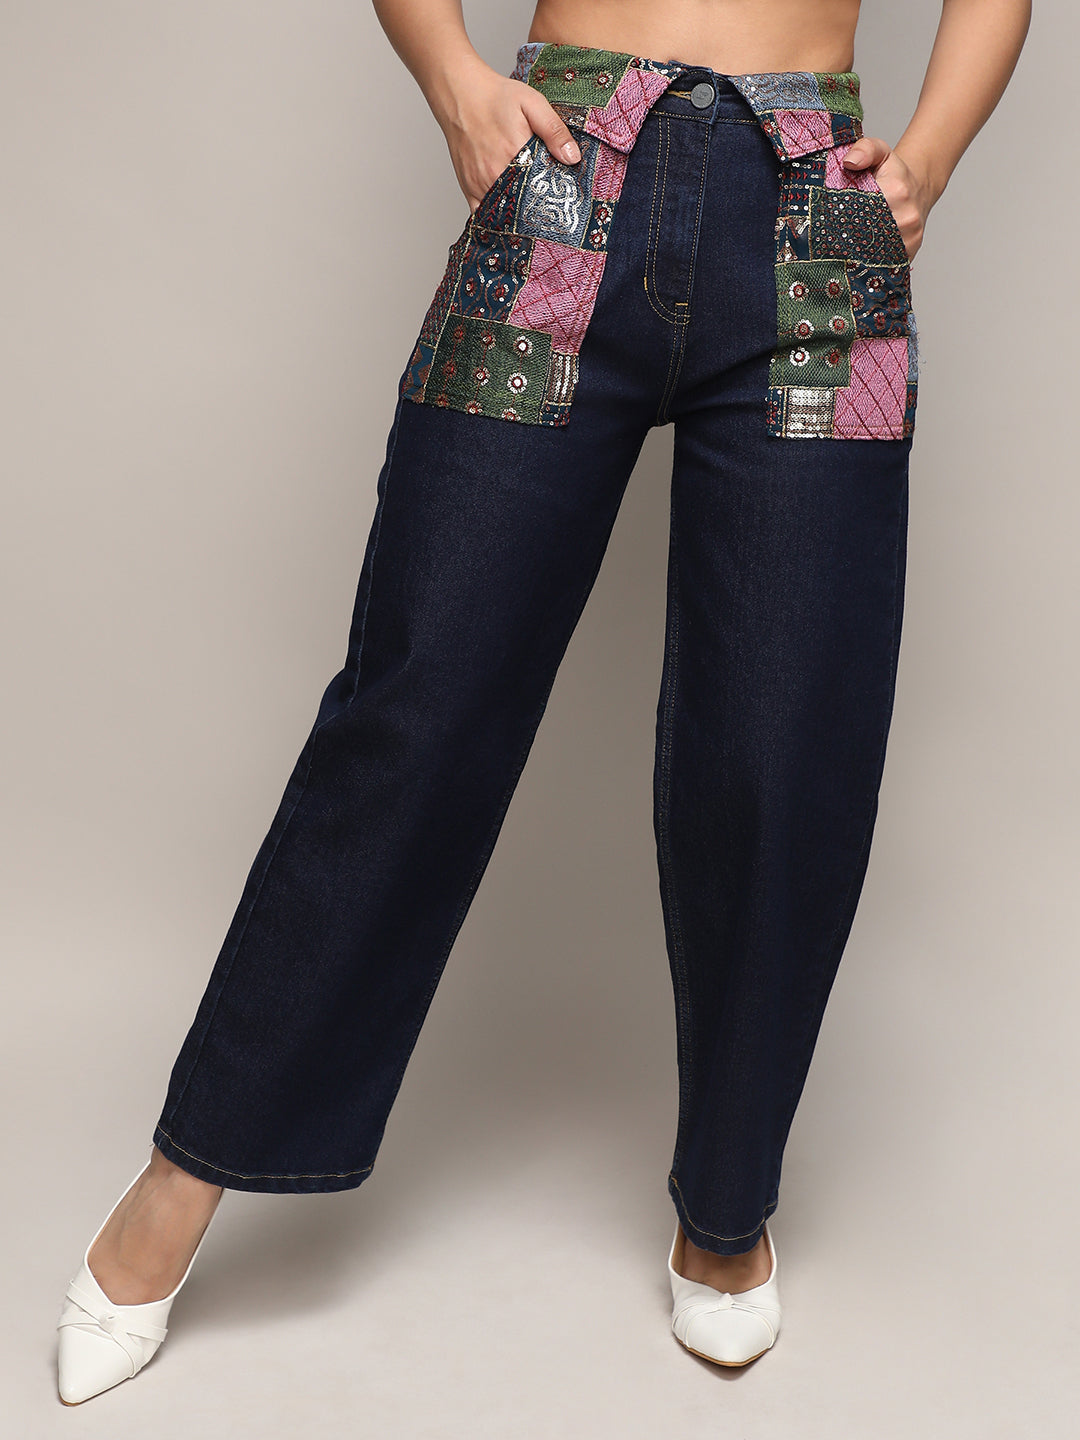 Embroidered Patch Denim Jeans